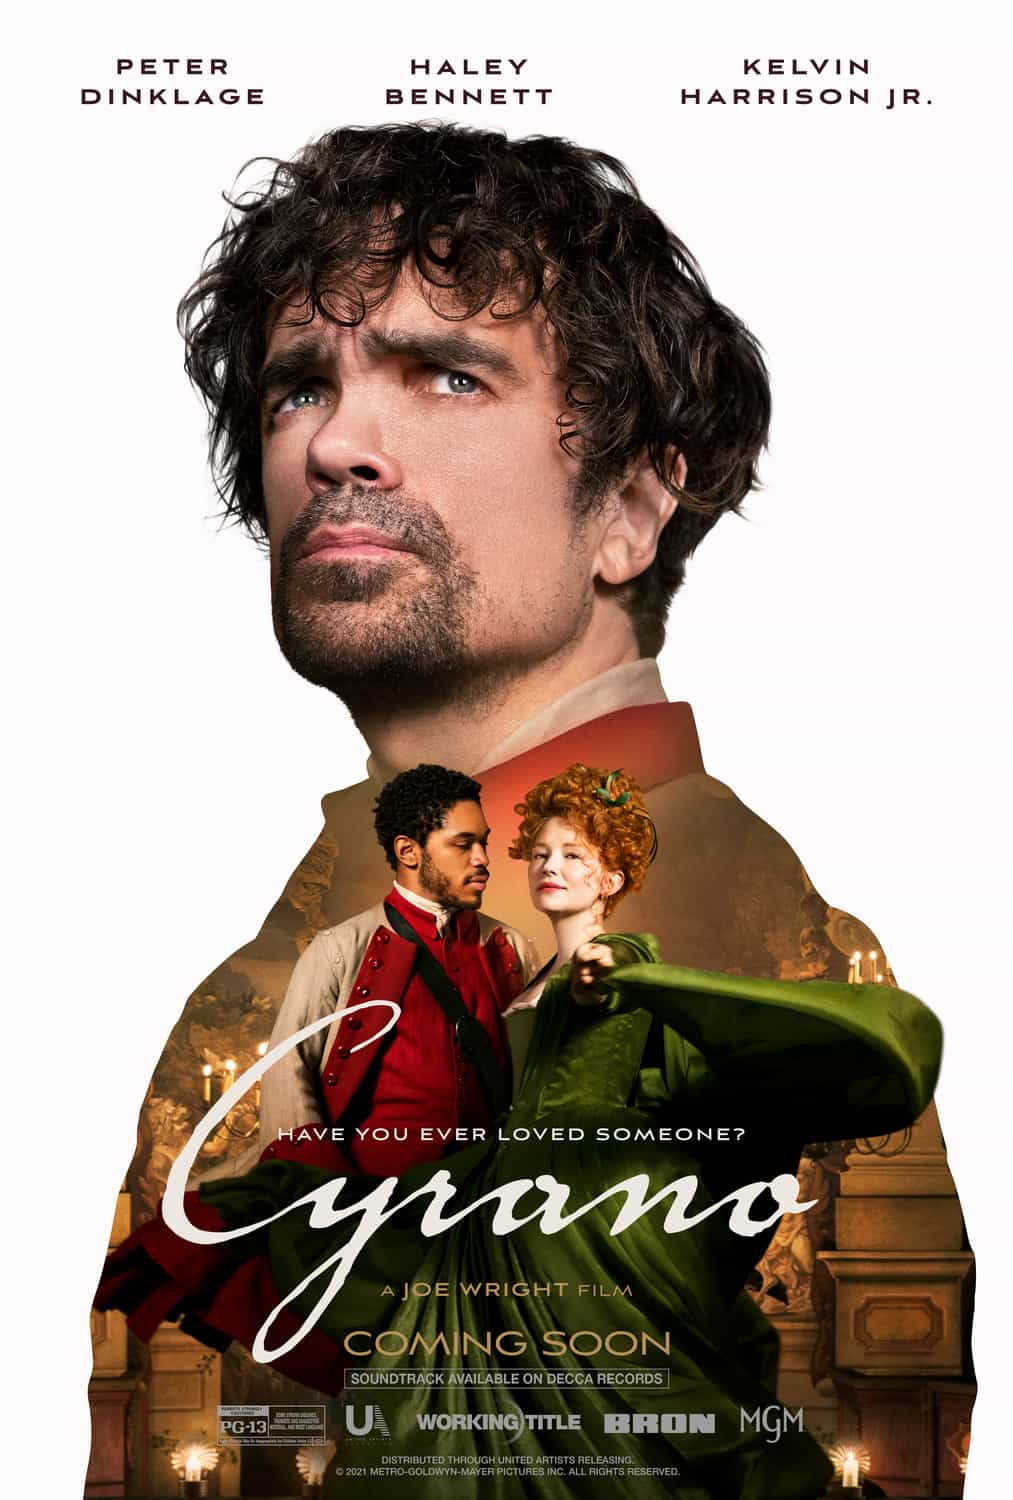 Cyrano has been given a 12A age rating in the UK for moderate violence, bloody images, discrimination, language, threat